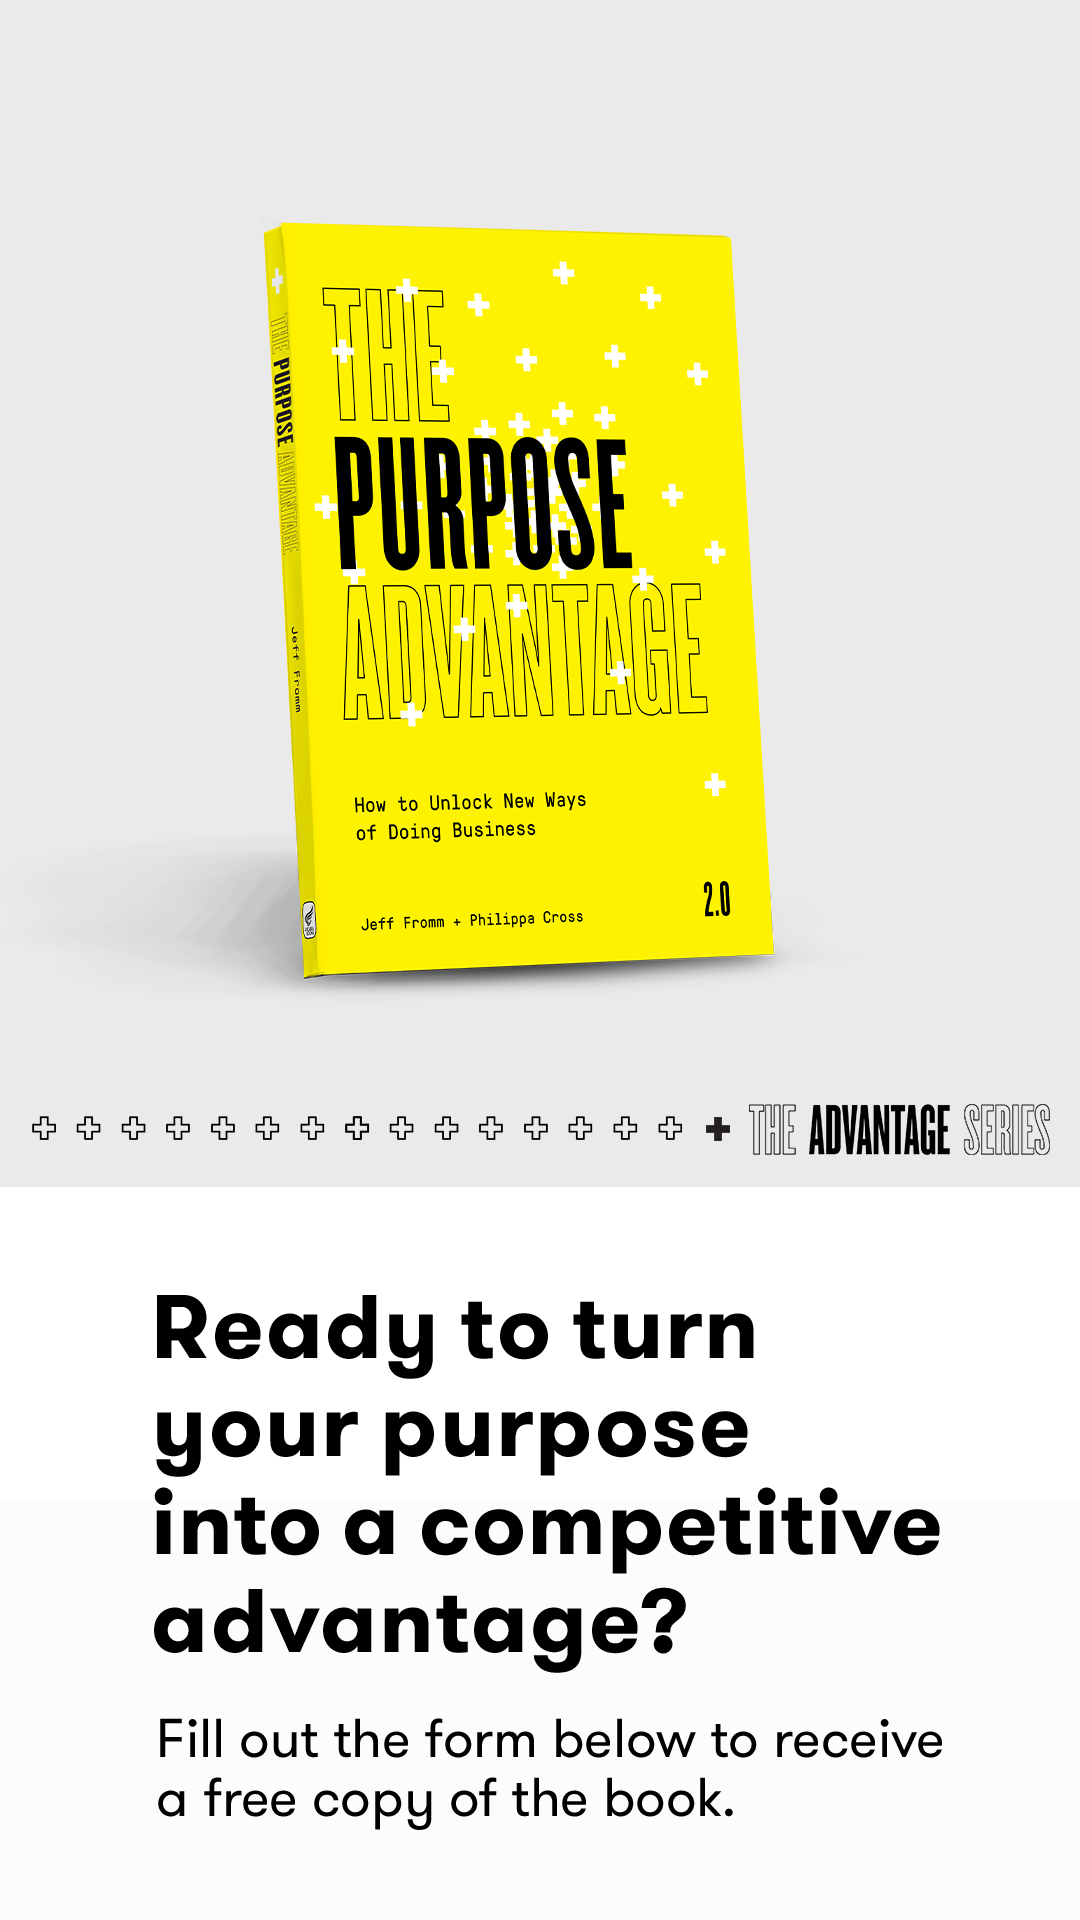 Cover shot of The Purpose Advntage book